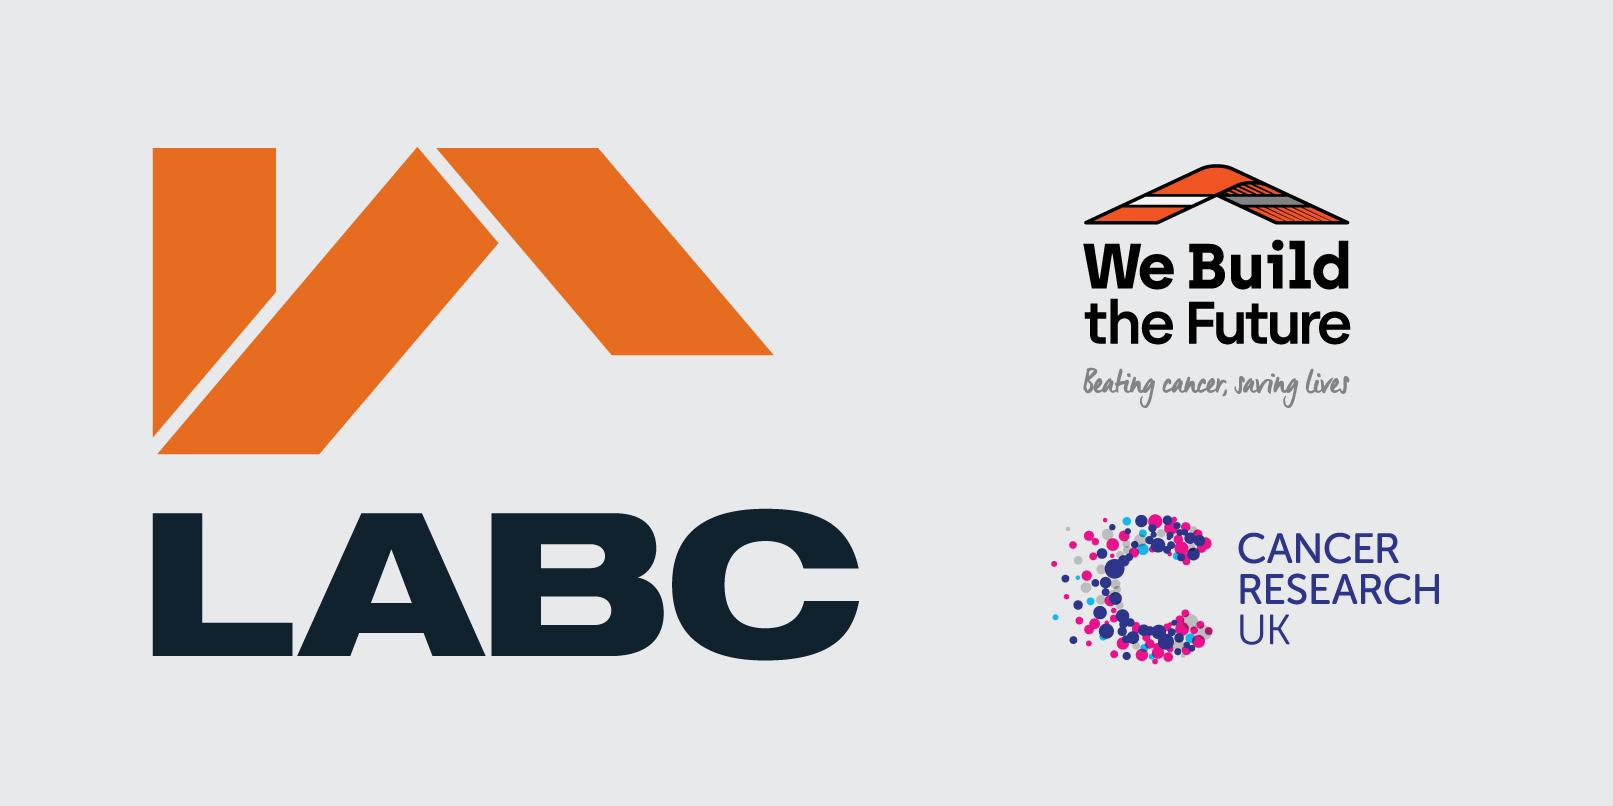 Logos for LABC, We Build The Future and Cancer Research UK - charity of the year 2019